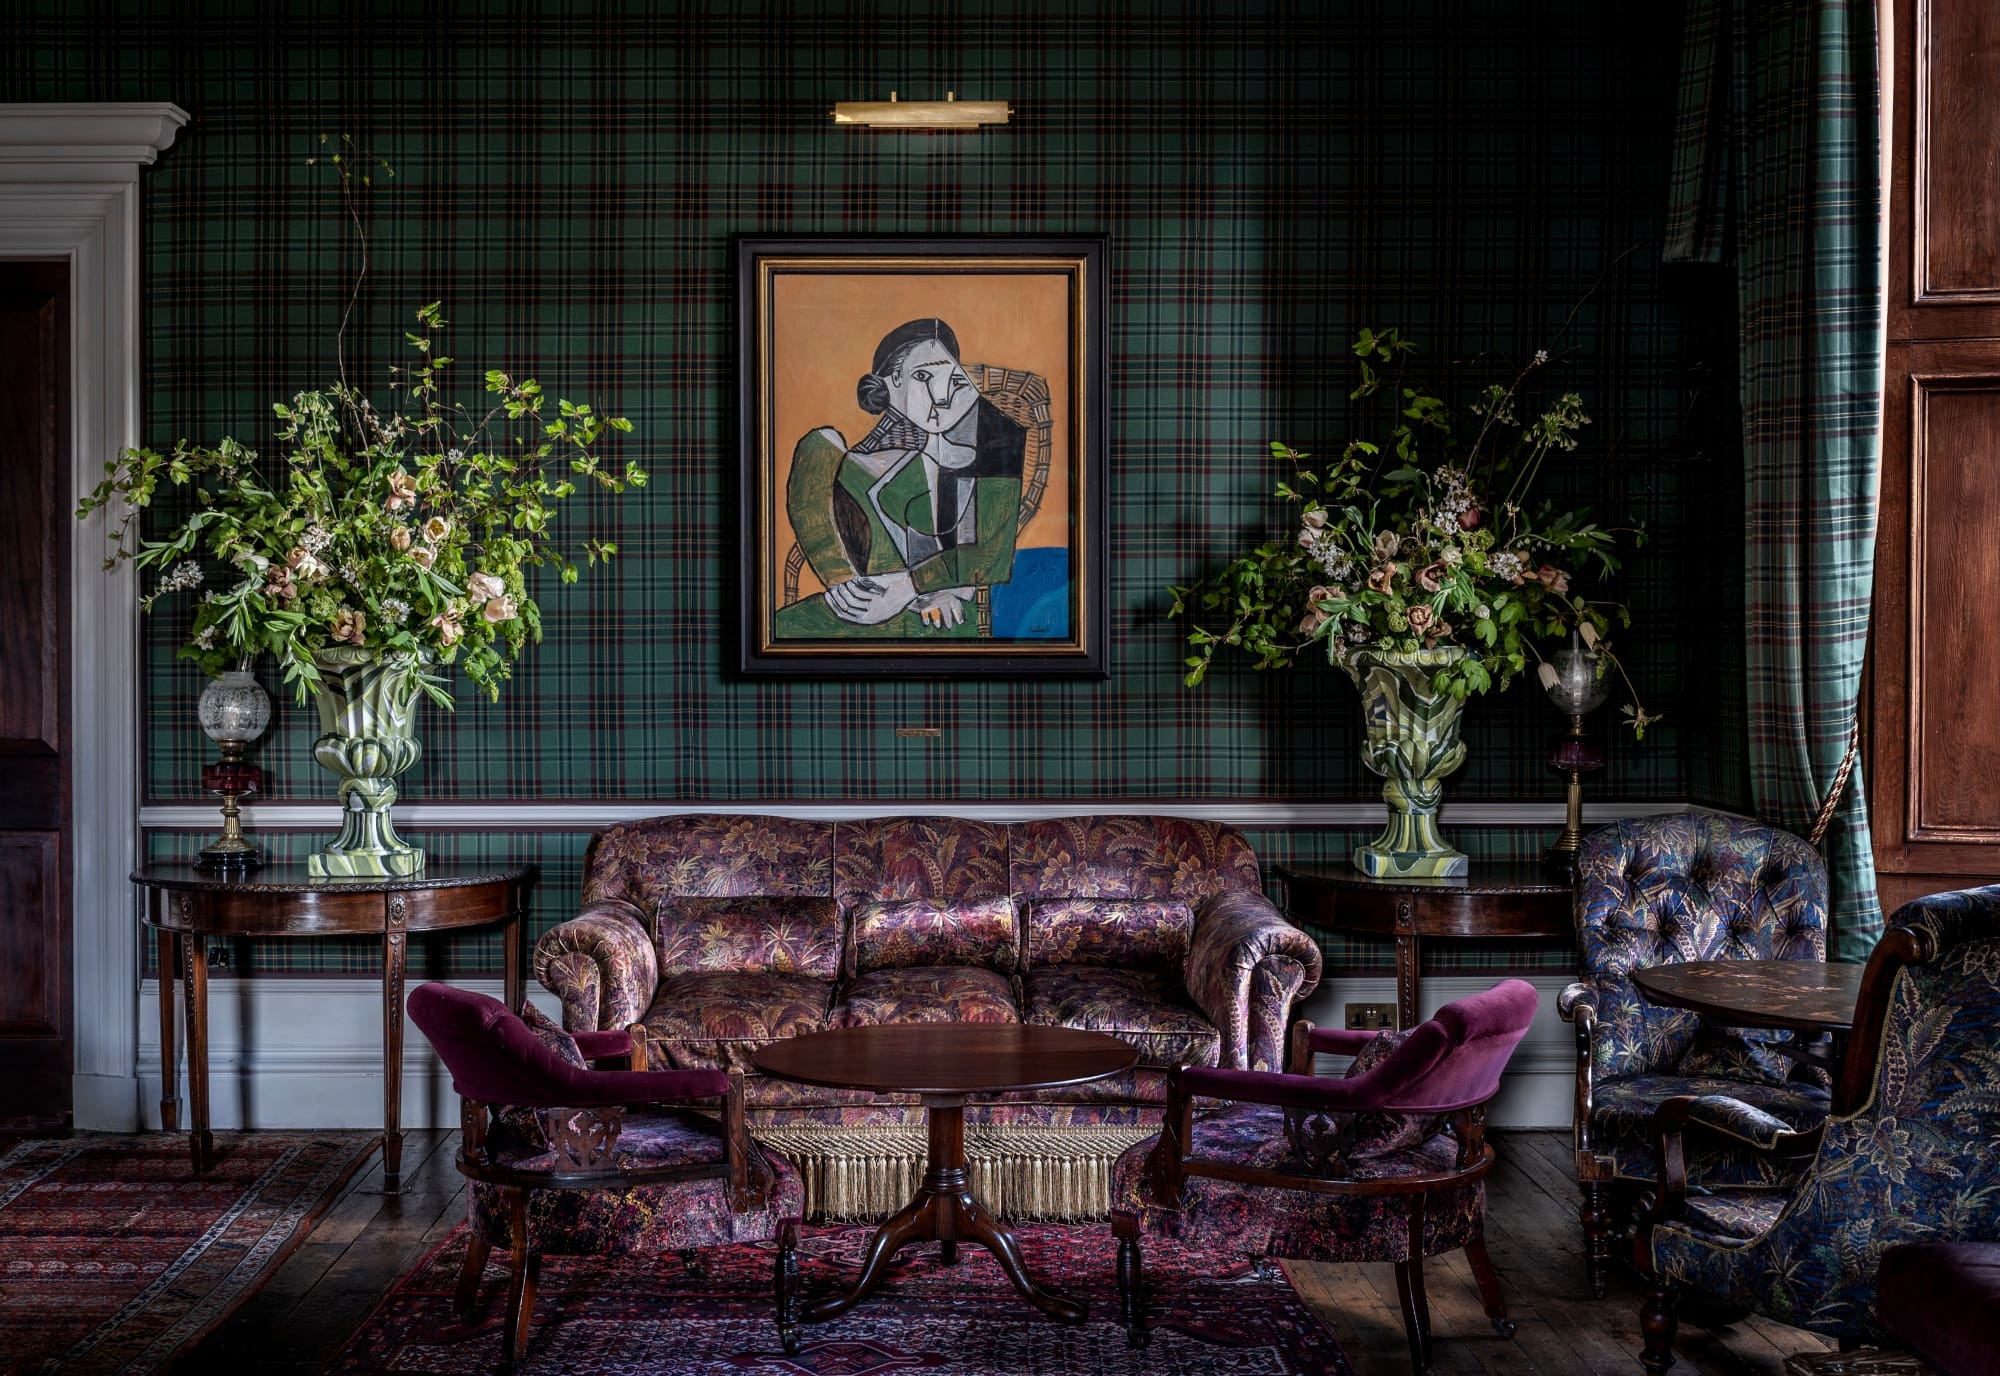 Hotels with exceptional art | Pablo Picasso, on display at The Fife Arms in Scotland